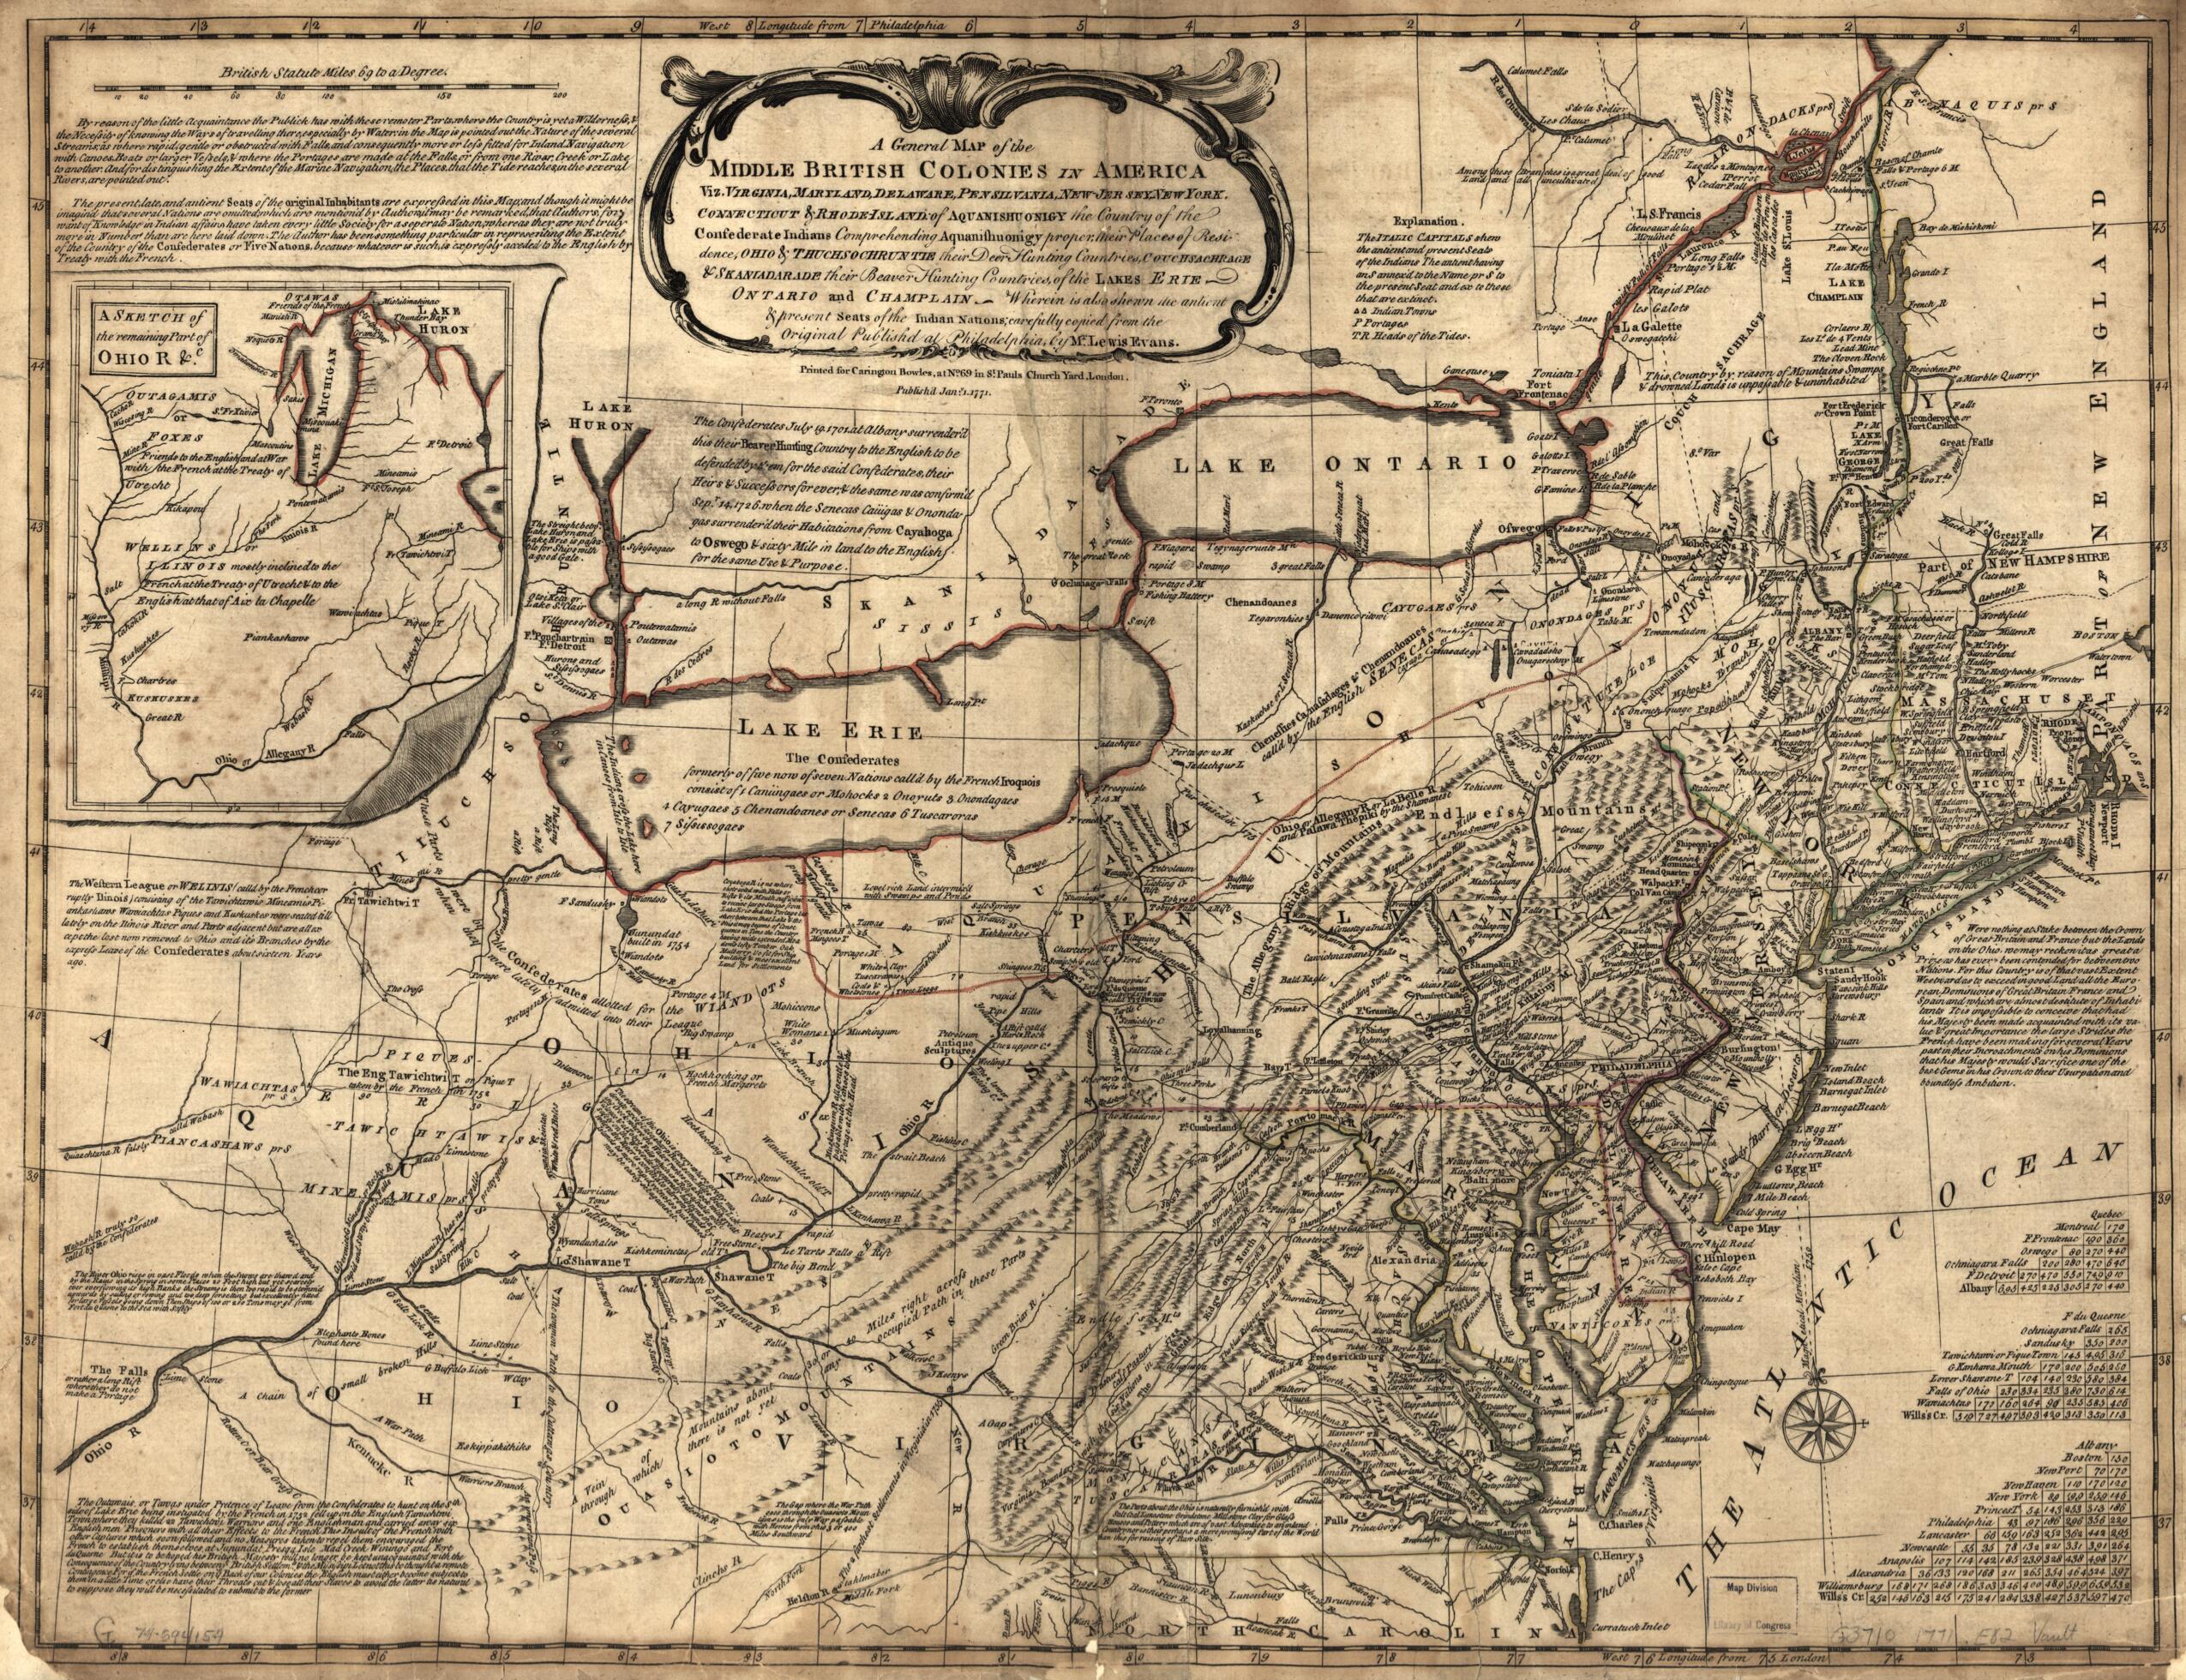 This old map of Jersey, New York, Connecticut &amp; Rhode Island: of Aquanishuonigy the Country of the Confederate Indians Comprehending Aquanishuonigy Proper, Their Places of Residence, Ohio &amp; Thuchsochruntie Their Deer Hunting Countries, Couchsachrage &amp; Sk